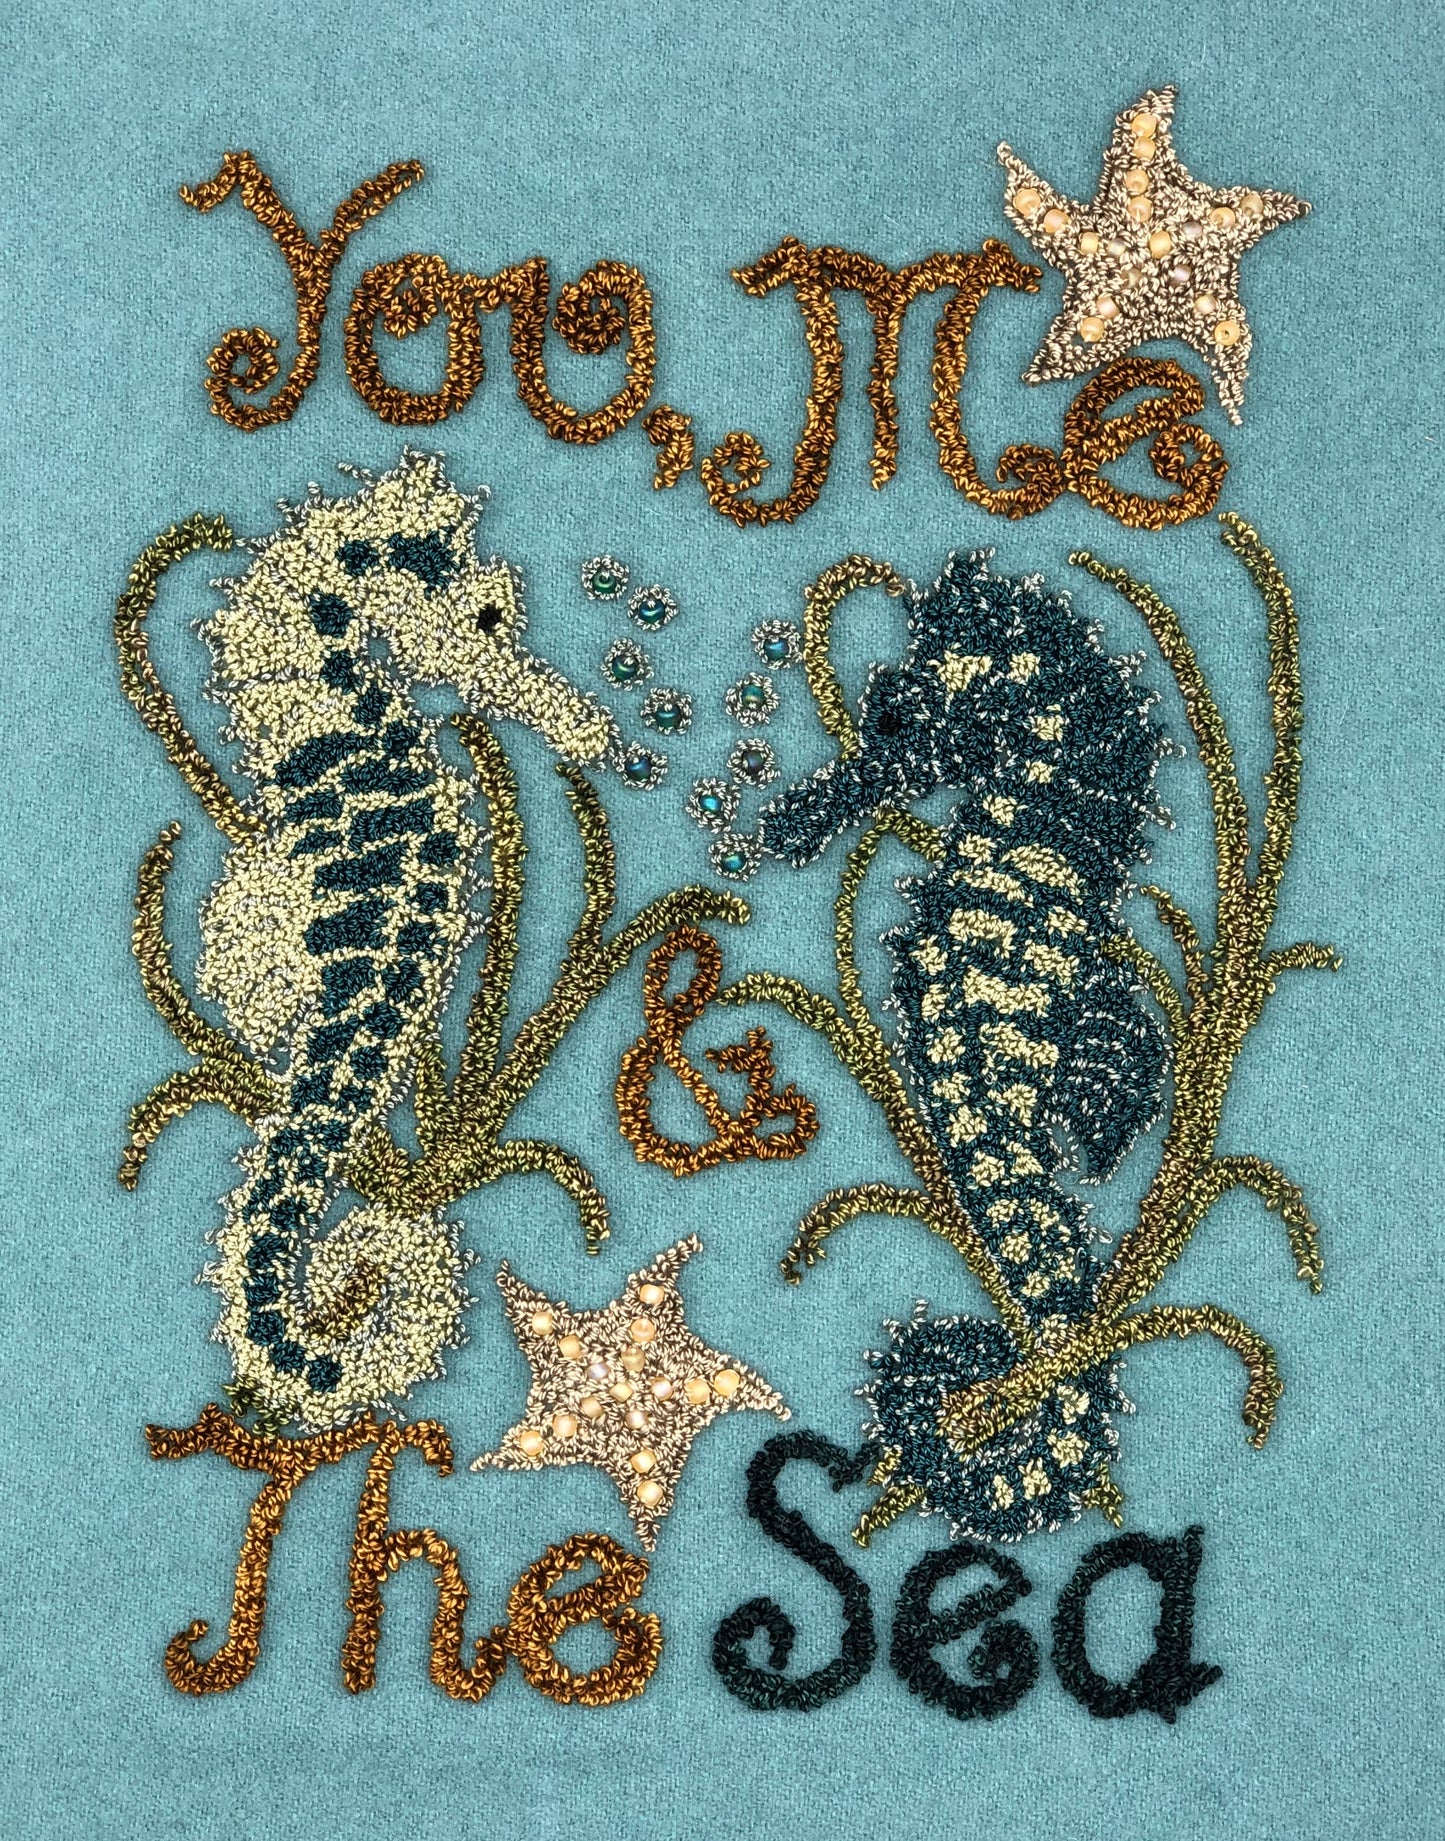 You, Me & The Sea -Punch Needle Pattern by Orphaned Wool. This wonderful undersea pattern is available as a Paper Pattern or a Pattern on Weaver's Cloth fabric. This design shown used wool fabric as the background but you can use thread to also create the background.